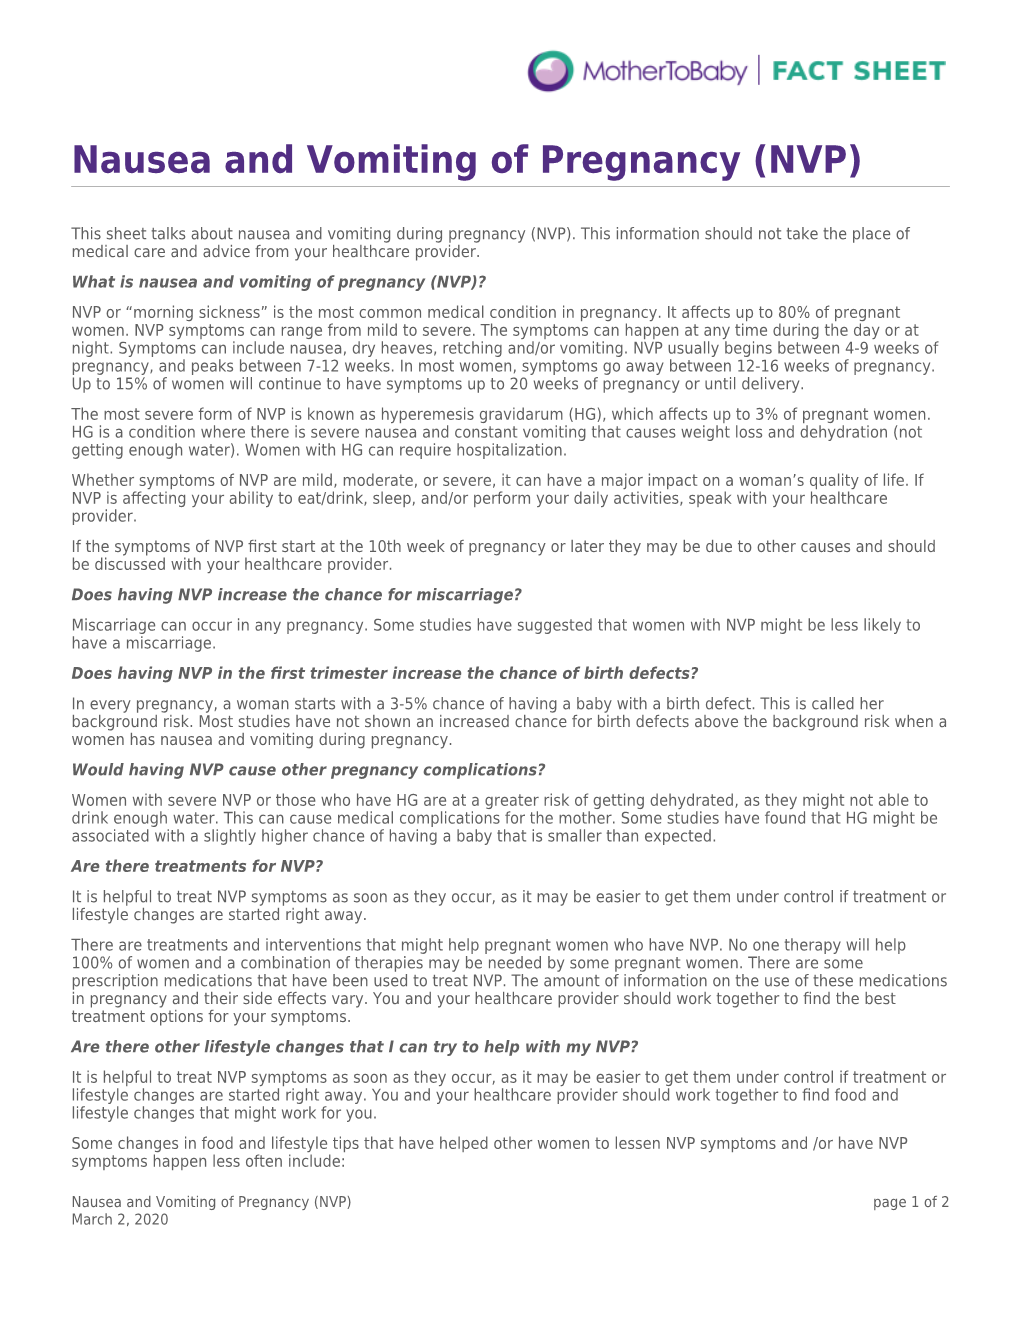 Nausea and Vomiting of Pregnancy (NVP)